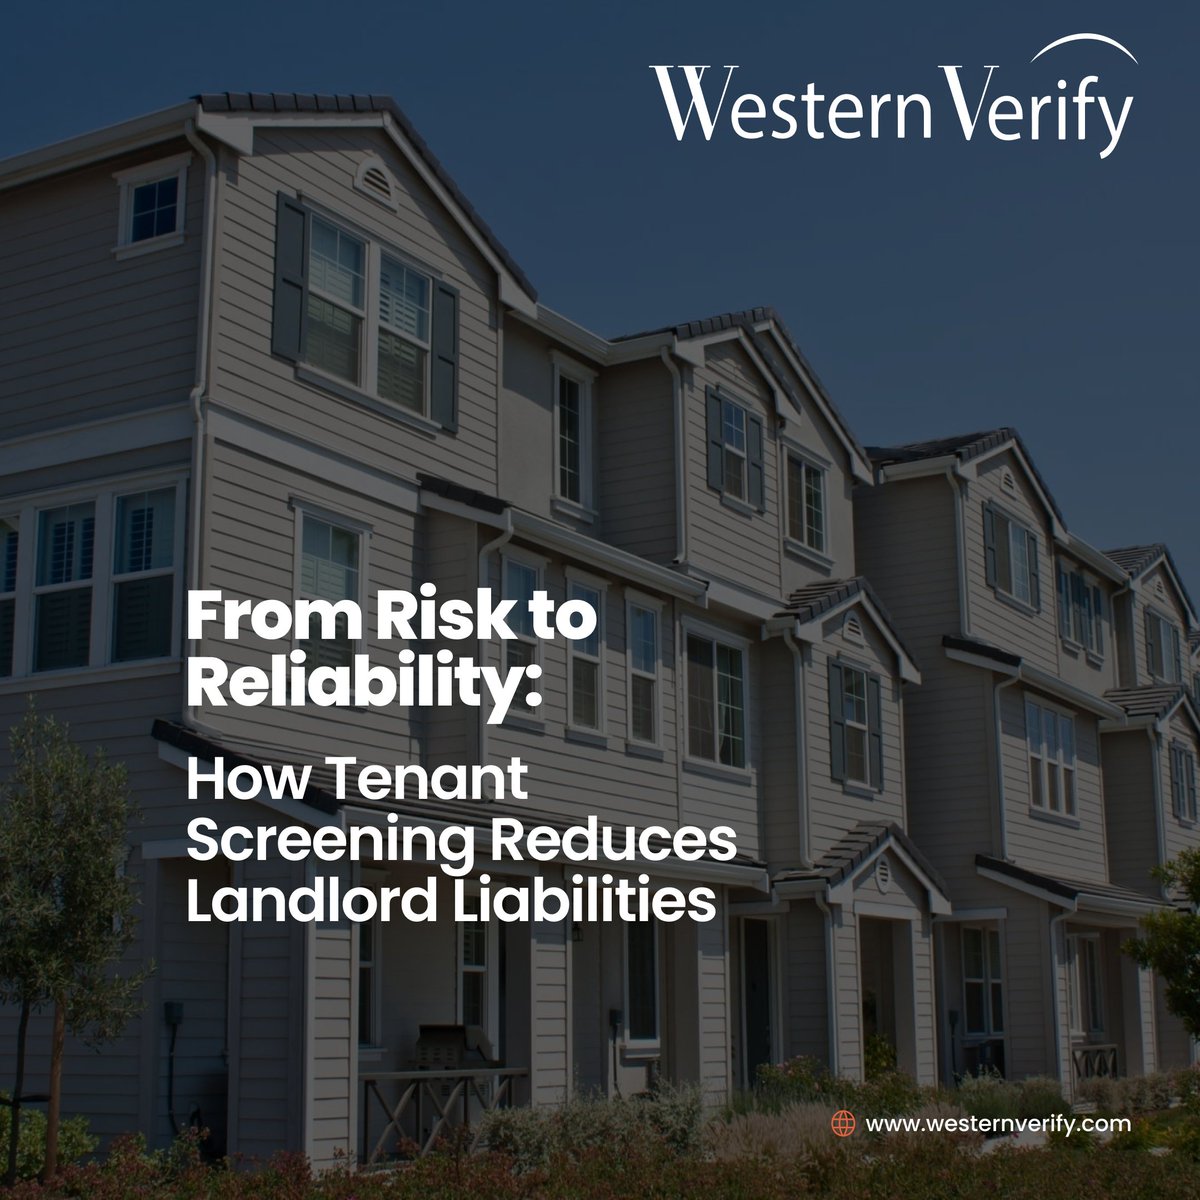 Discover how tenant screening reduces landlord liabilities and ensures reliable rental candidates! 

Learn more in our latest blog: westernverify.com/from-risk-to-r… 

#TenantScreening #LandlordLiabilities #RentalProperty #RiskManagement #PropertyManagement